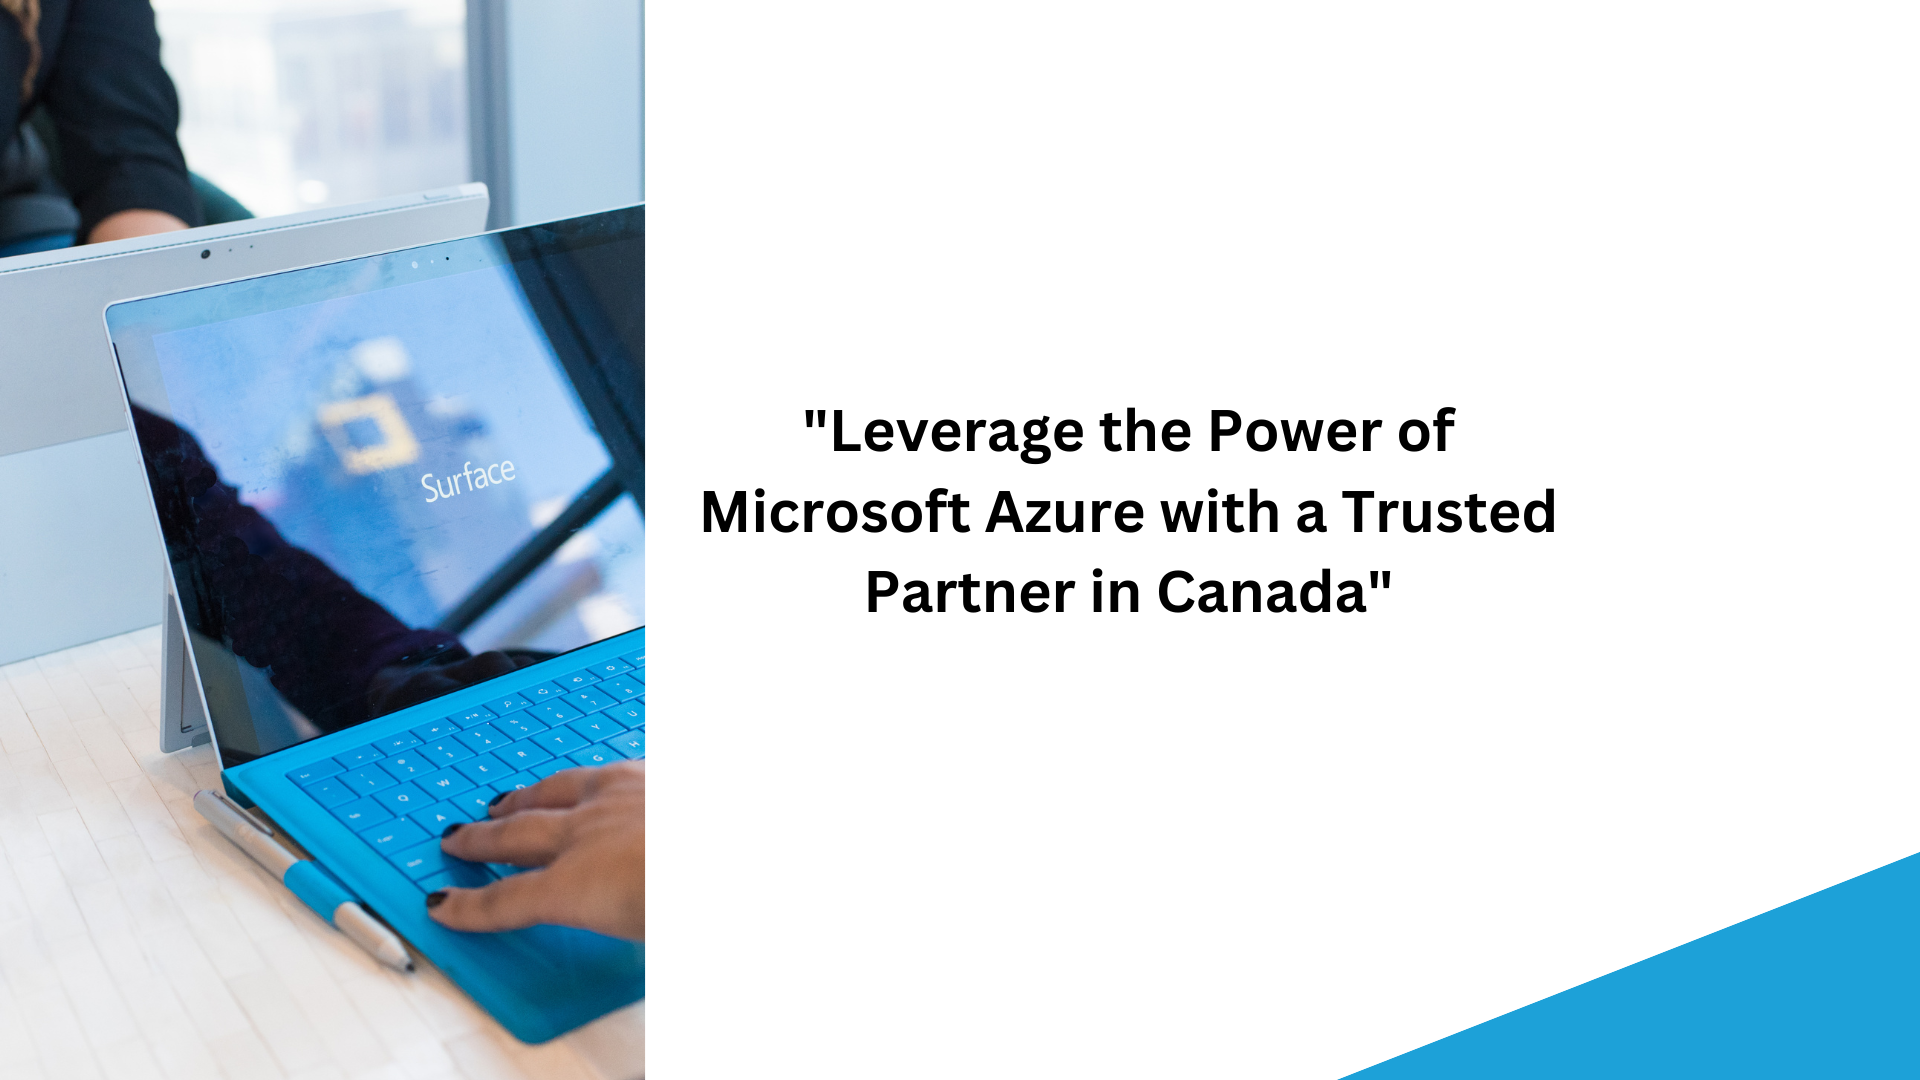 Leverage the Power of Microsoft Azure with a Trusted Partner in Canada